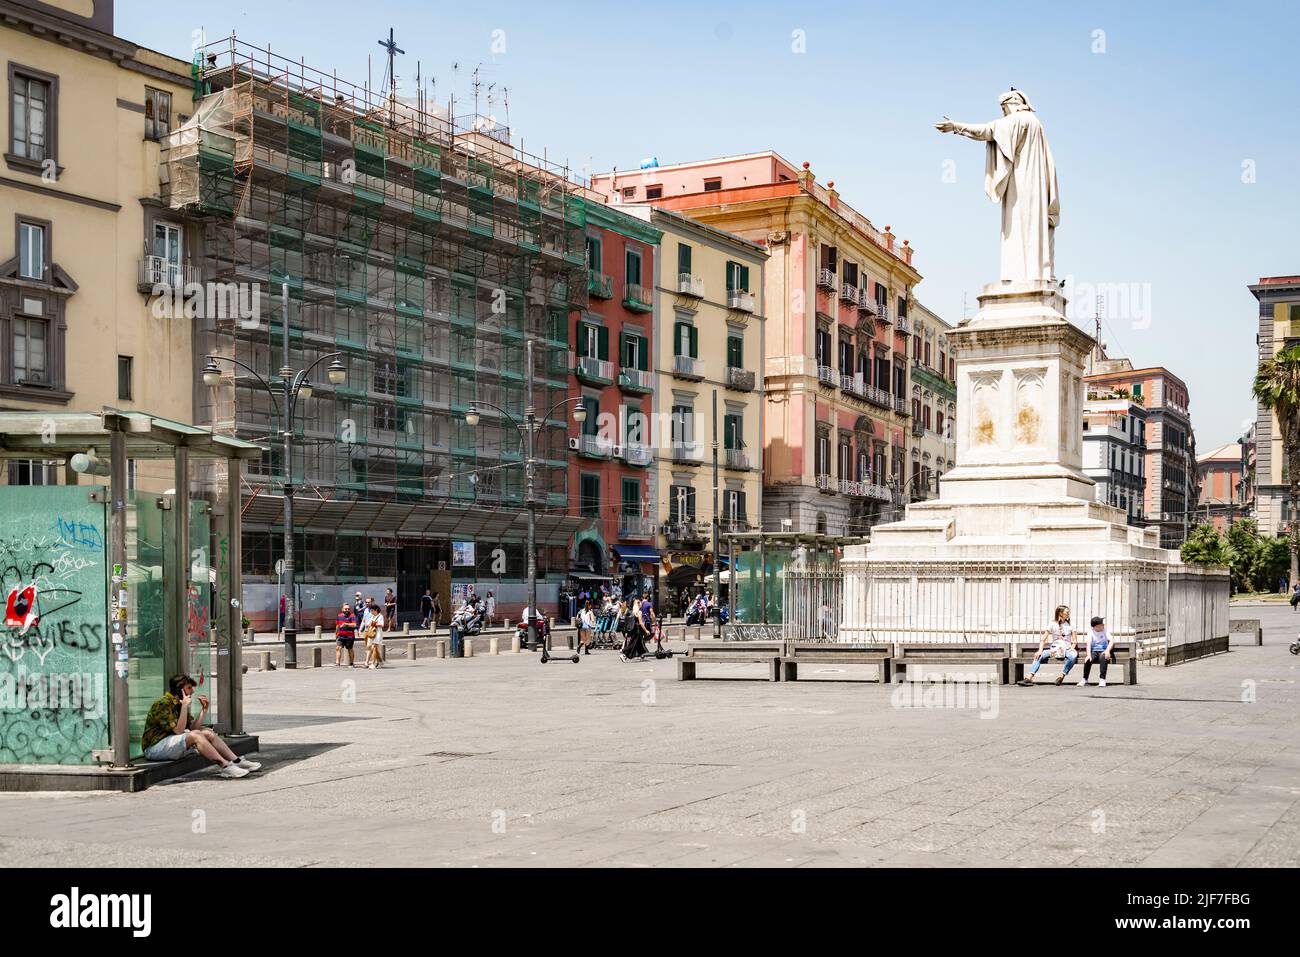 Piazza Dante is a large public square in Naples, Italy, named after the poet Dante Alighieri. The square is dominated by a 19th-century statue of the Stock Photo